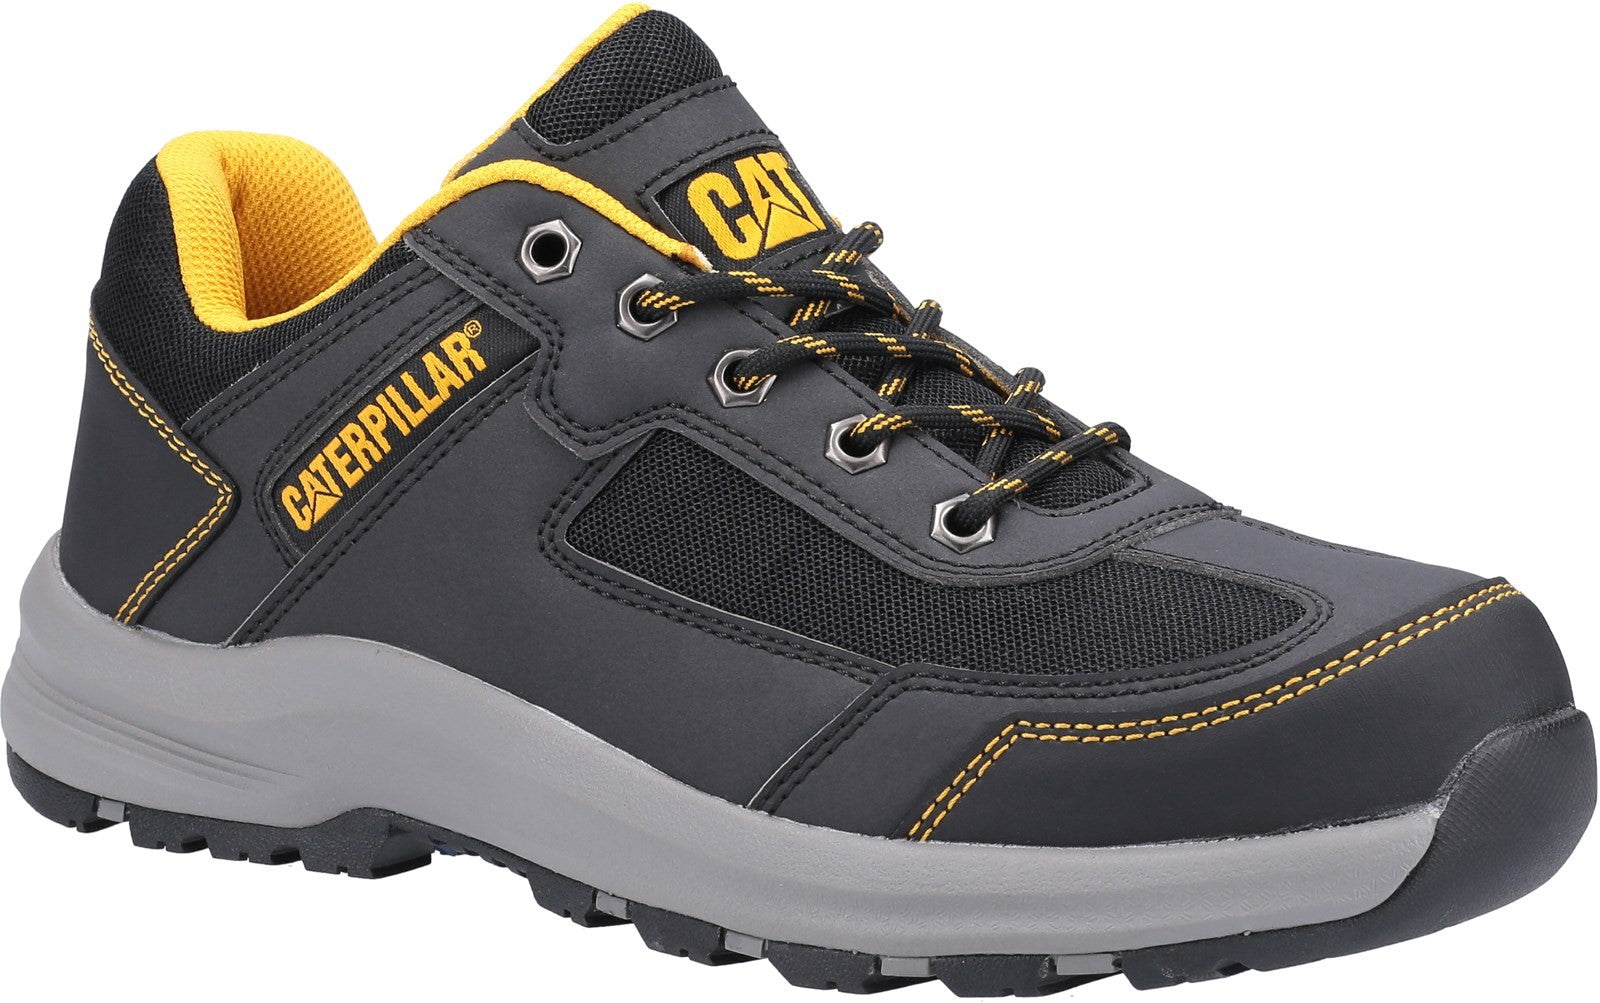 Caterpillar CAT Elmore Lo S1P grey steel toe/midsole work safety trainer shoes